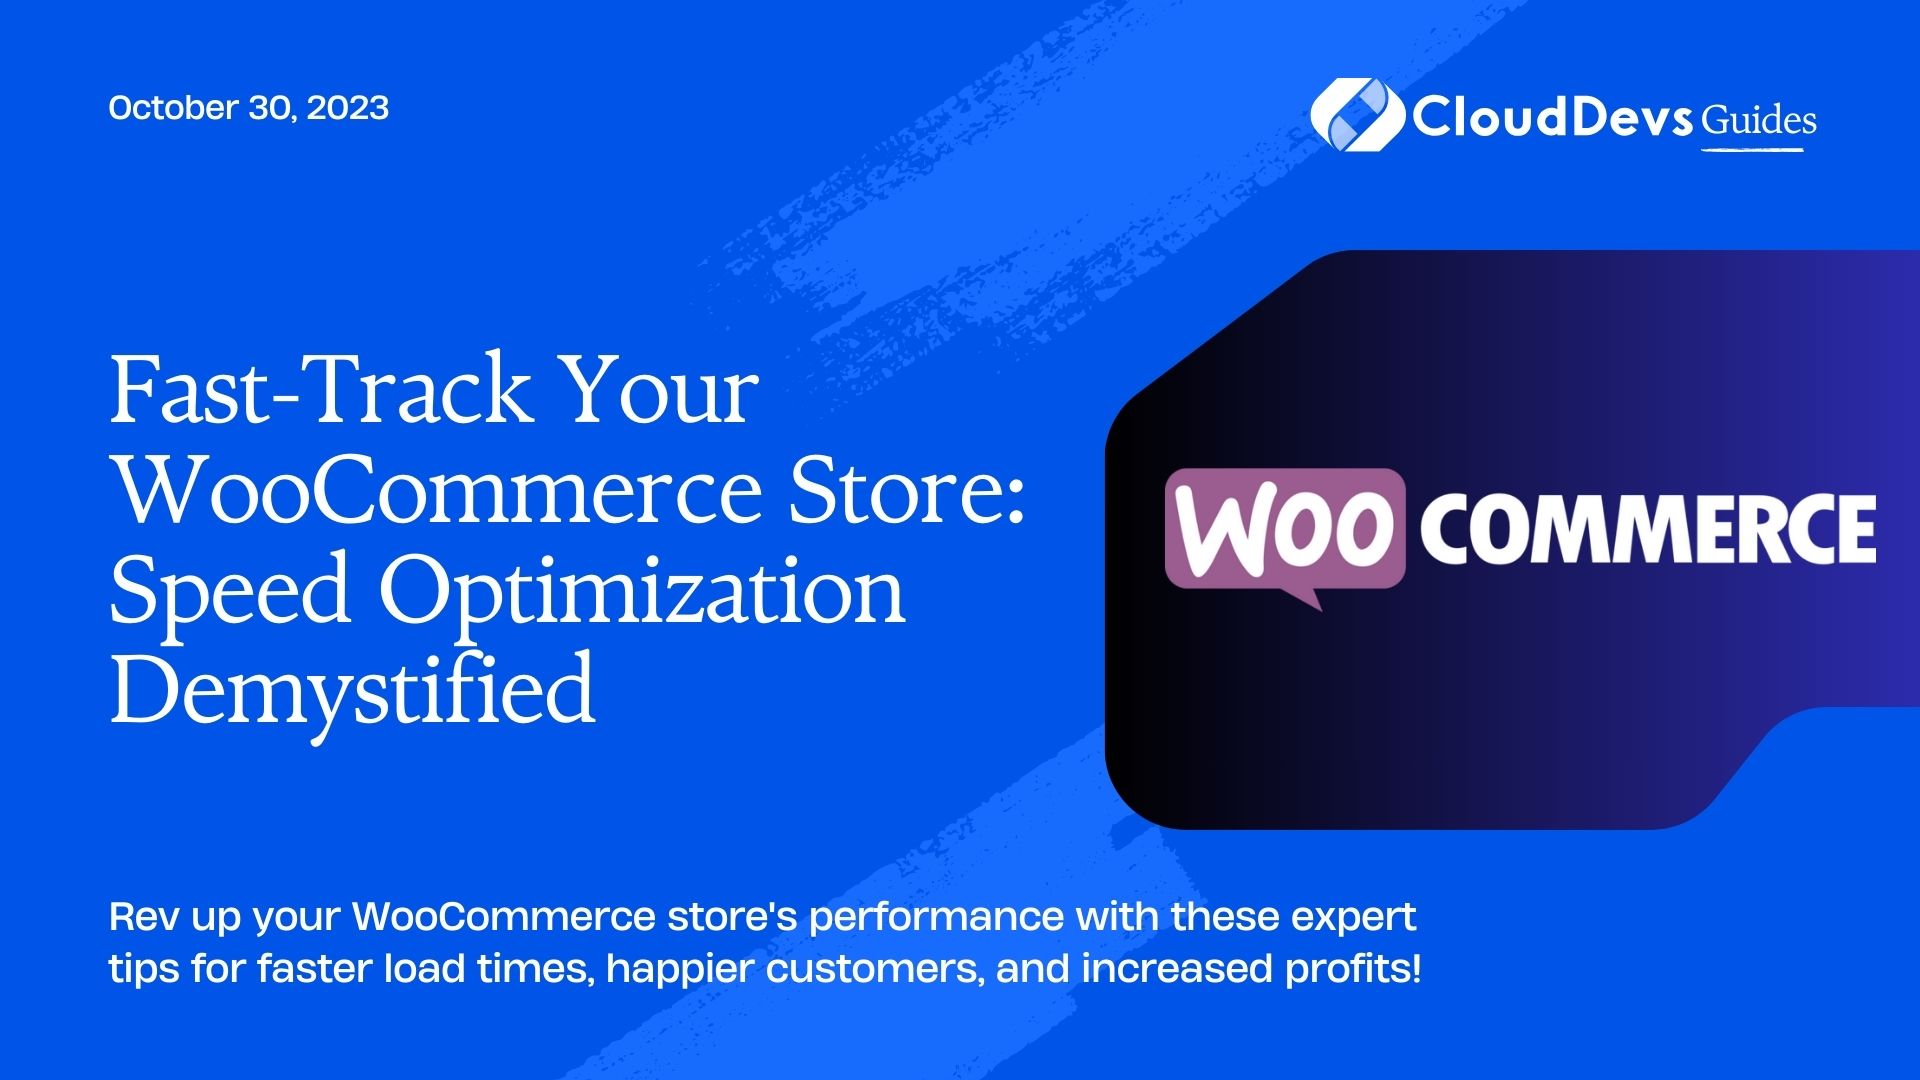 Fast-Track Your WooCommerce Store: Speed Optimization Demystified